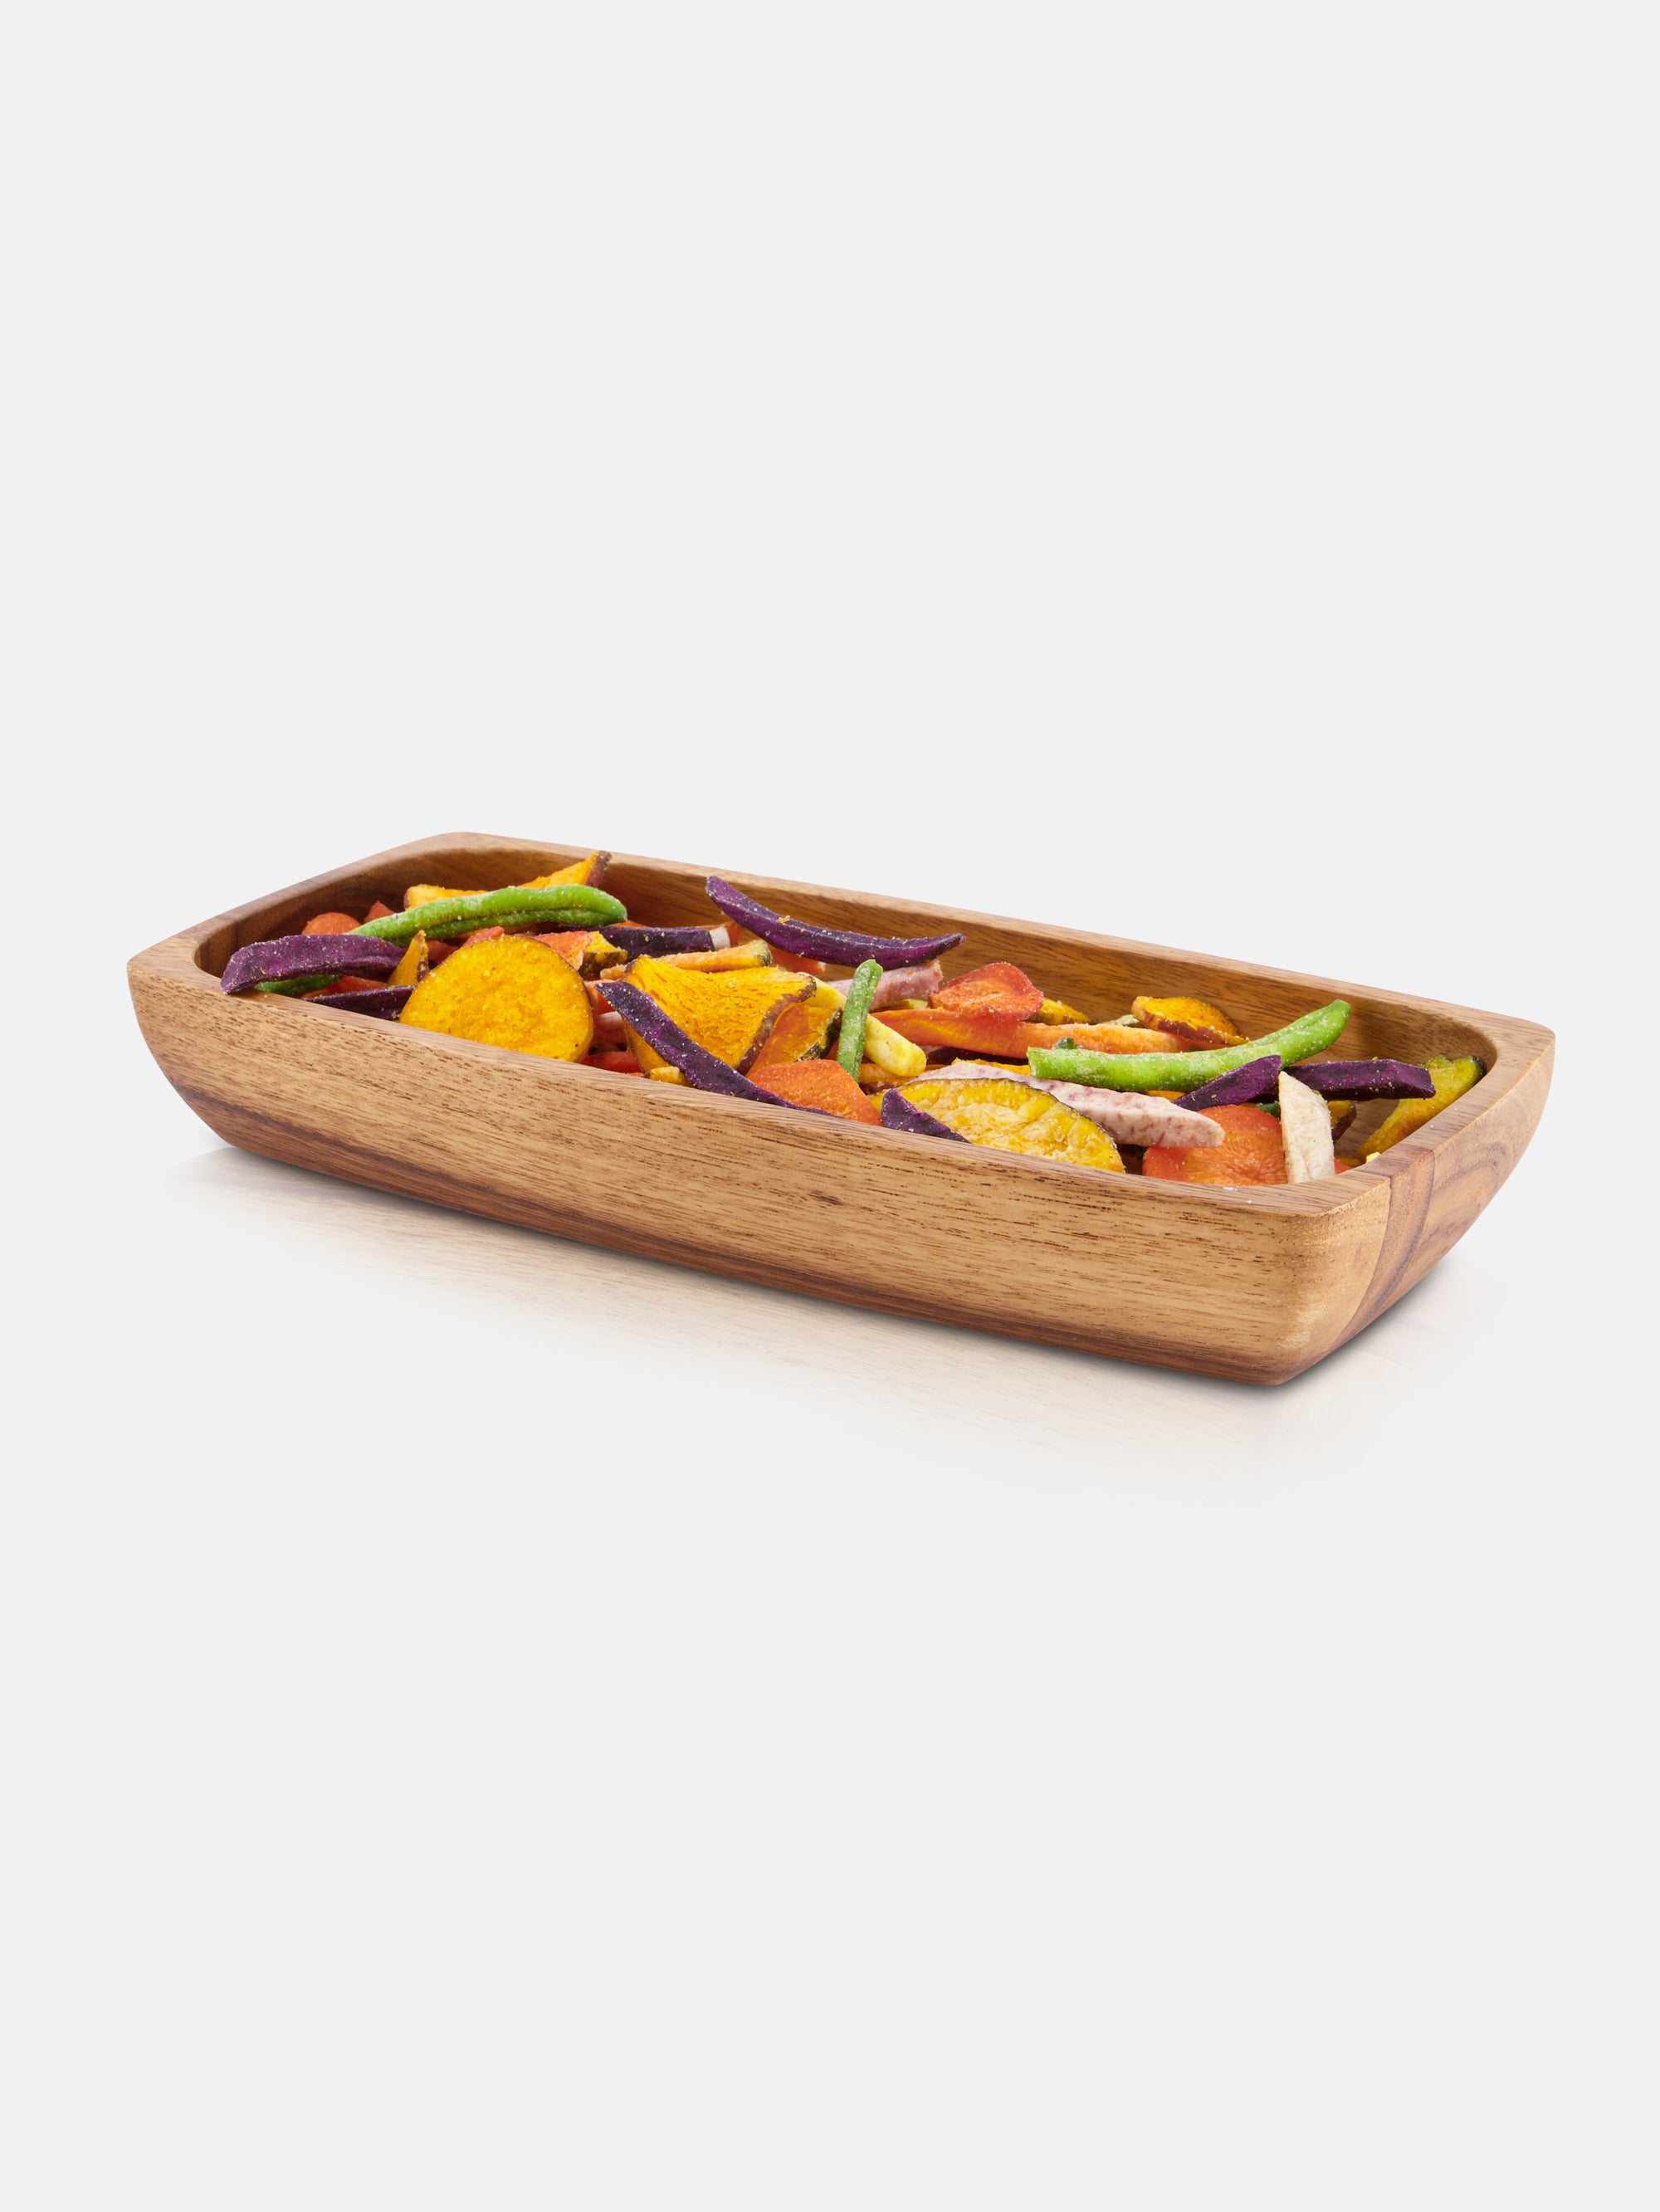 Acasia wood Serving Tray